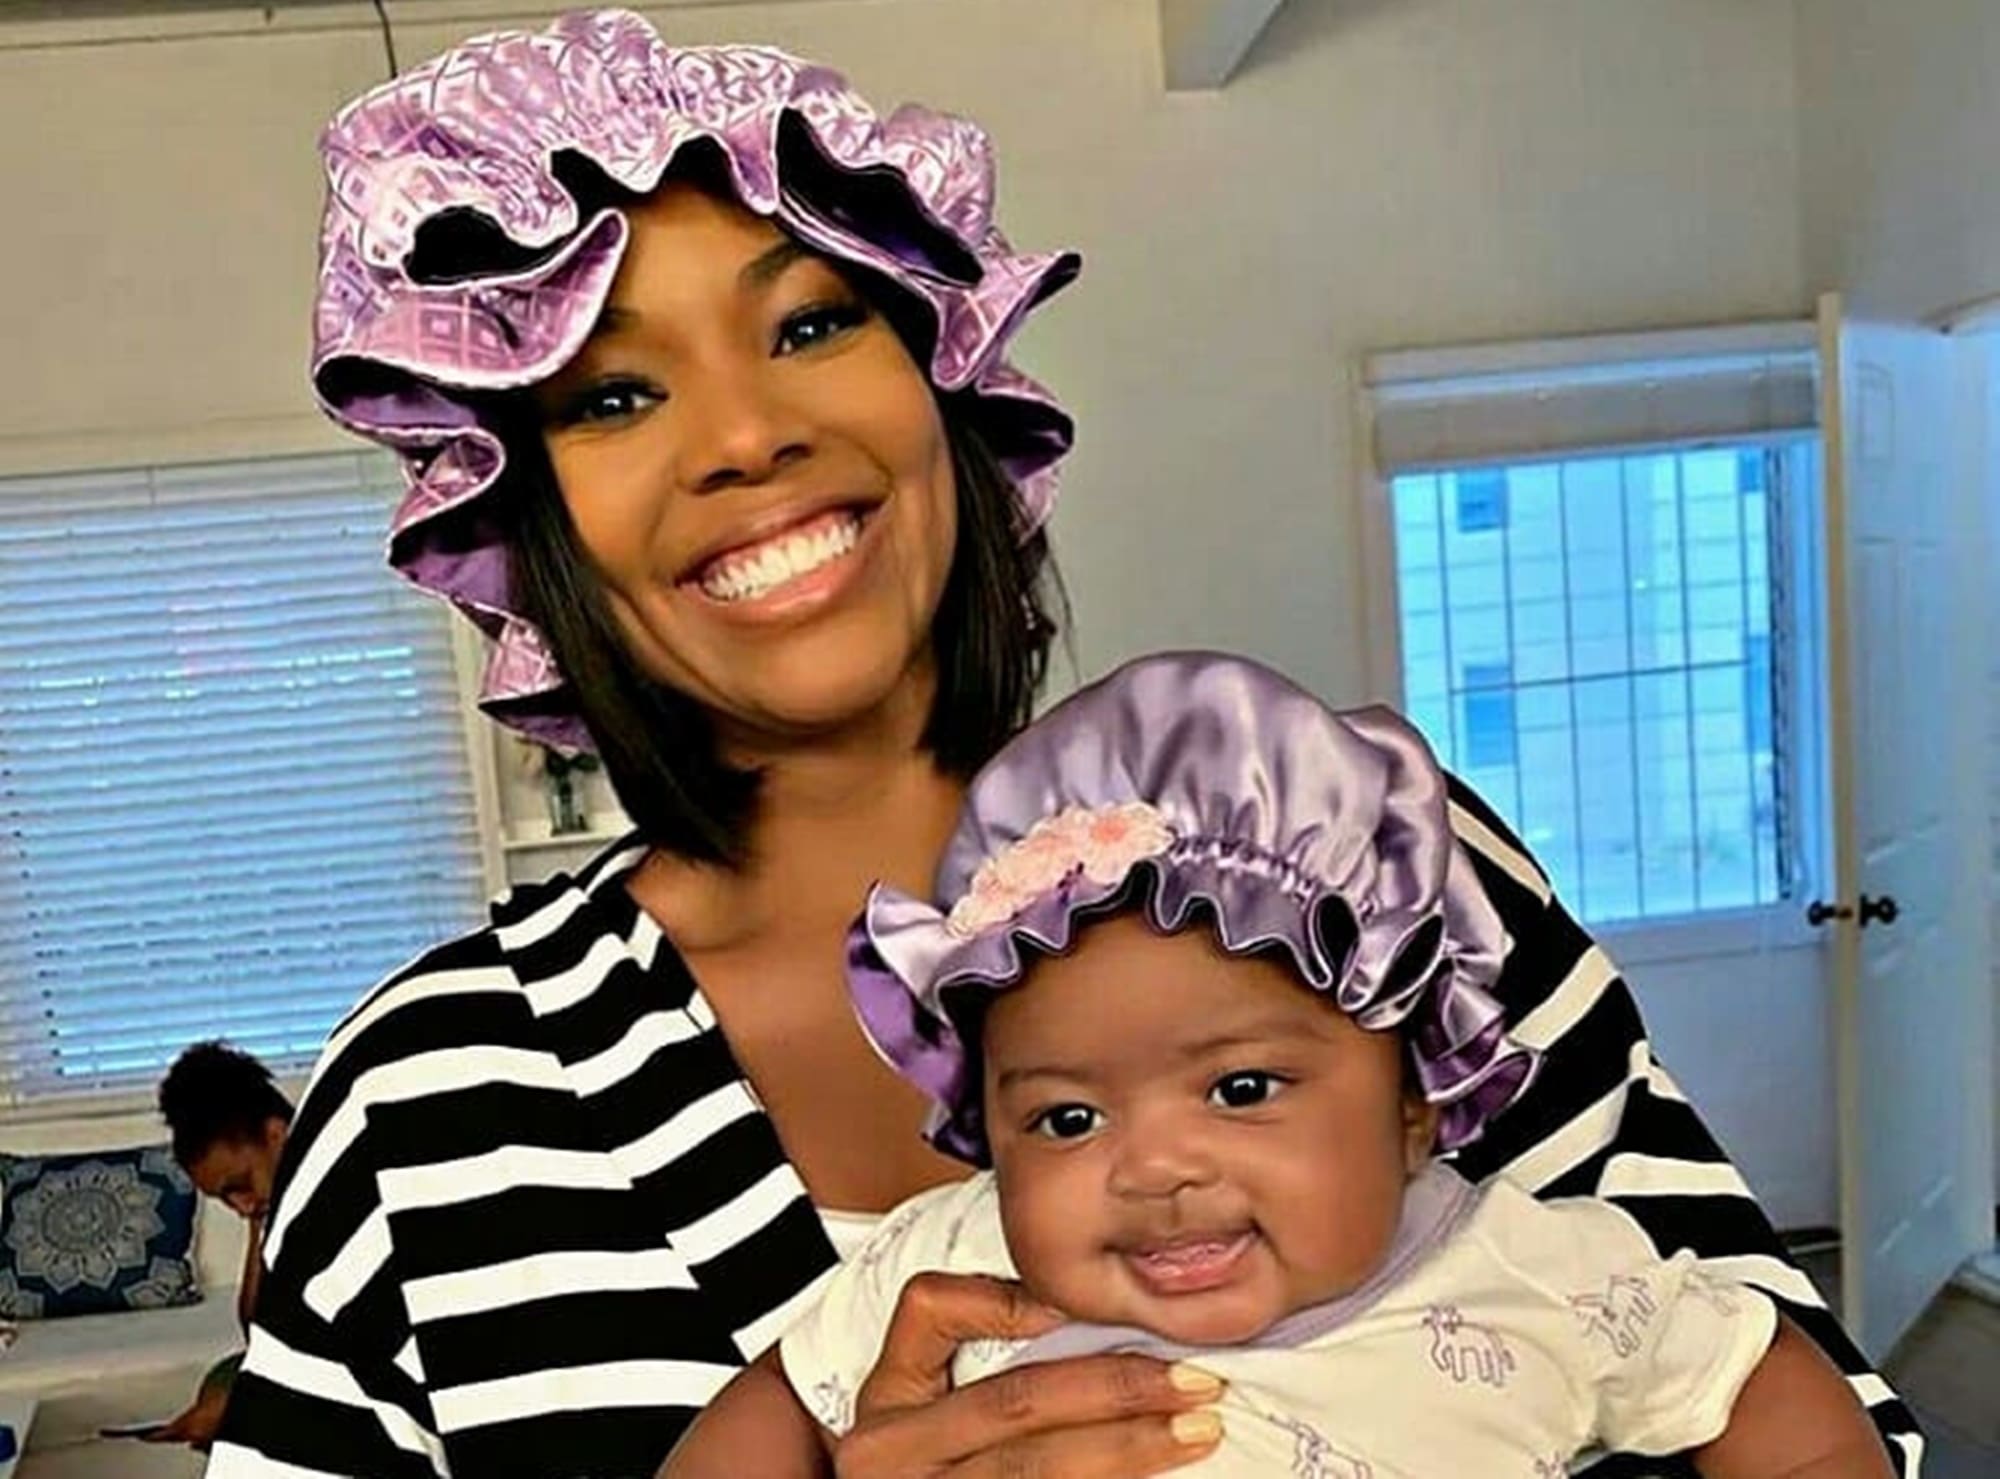 Gabrielle Union Spends Quality Time With Her Family - See The New Pics And Video Featuring Baby Kaavia!